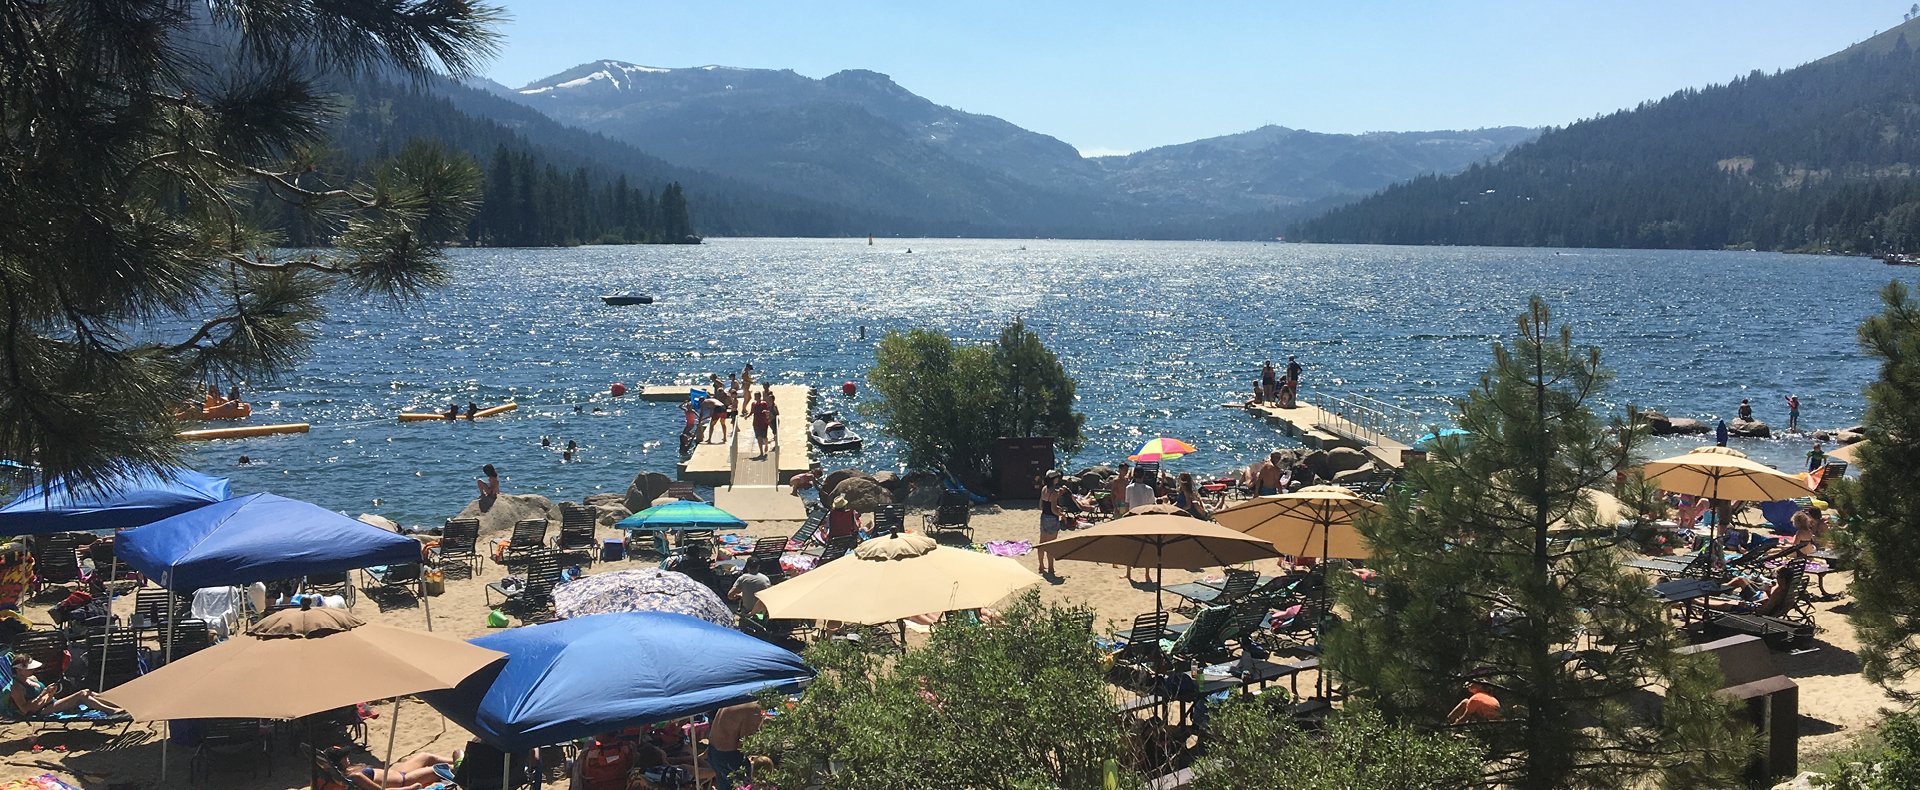 Tahoe Donner: A Beautiful Mountain Community — Truckee and Lake Tahoe